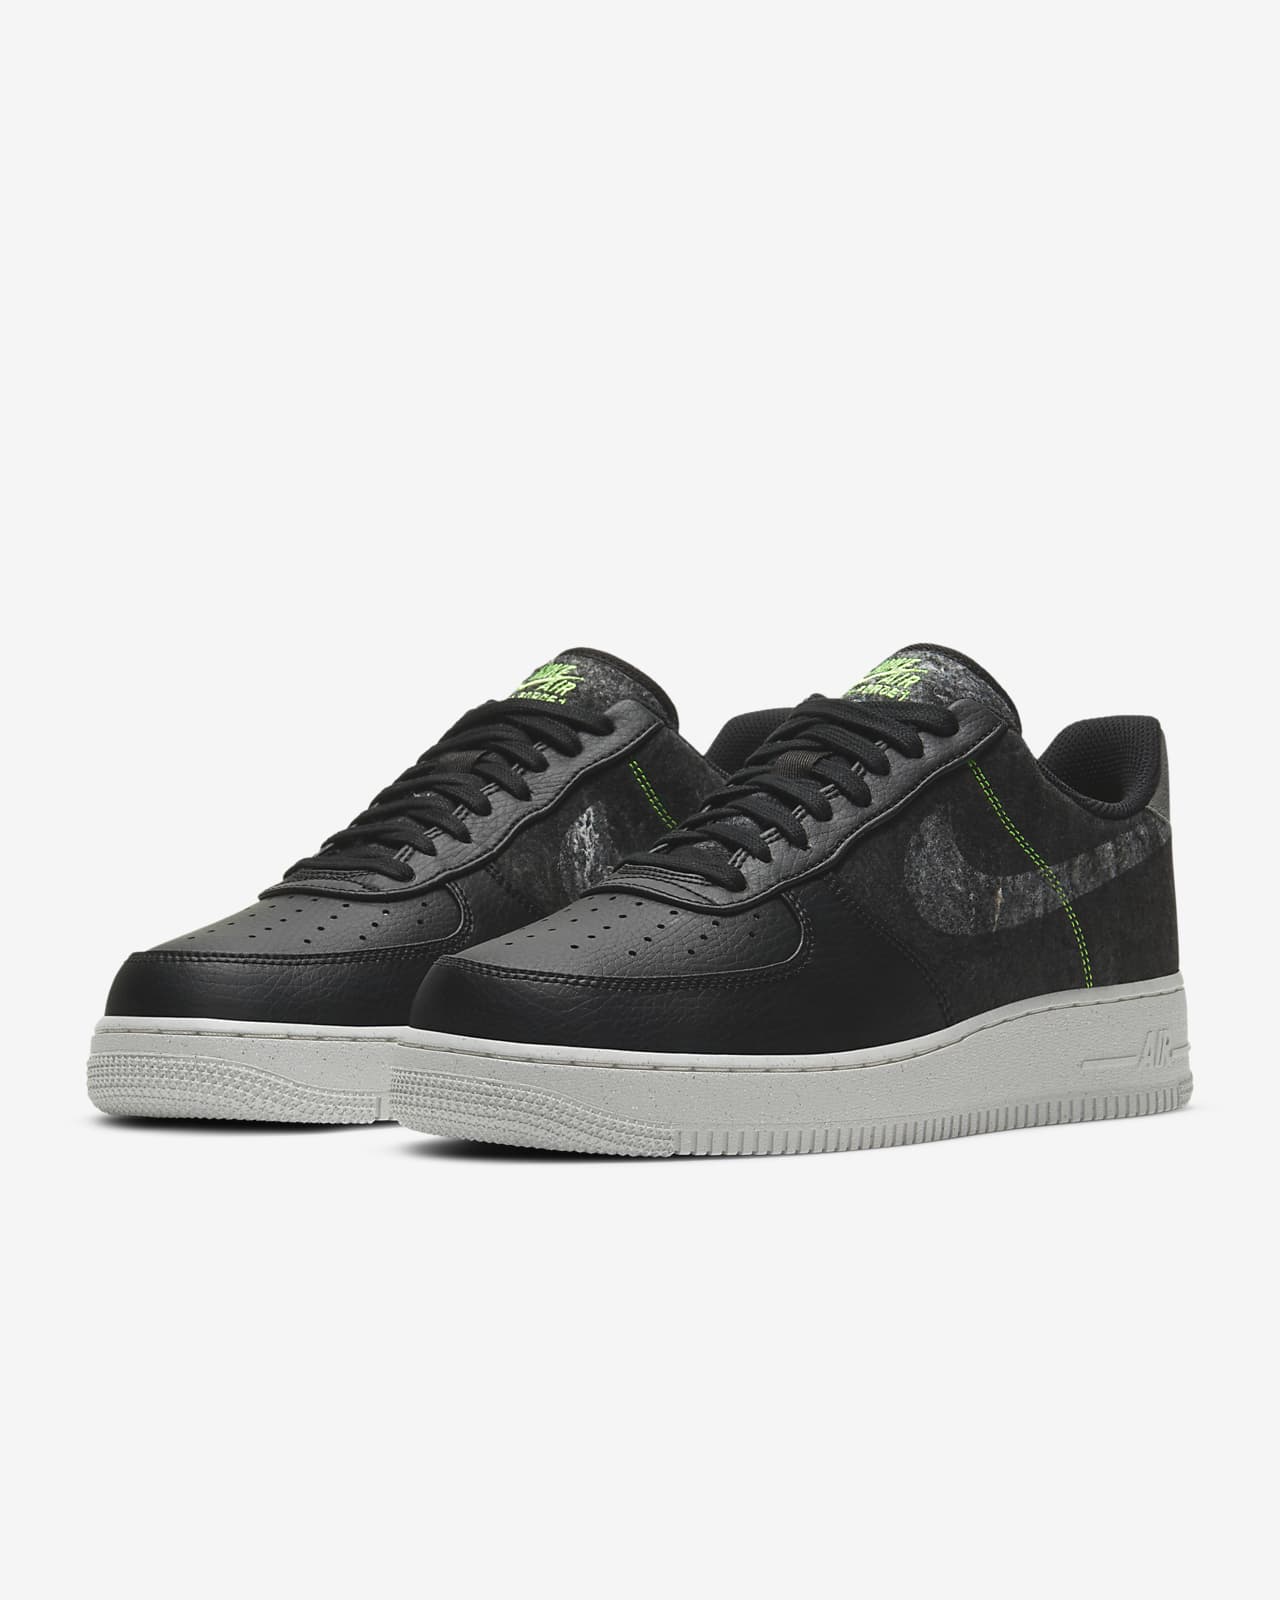 nike air force 1 lv8 size 6.5